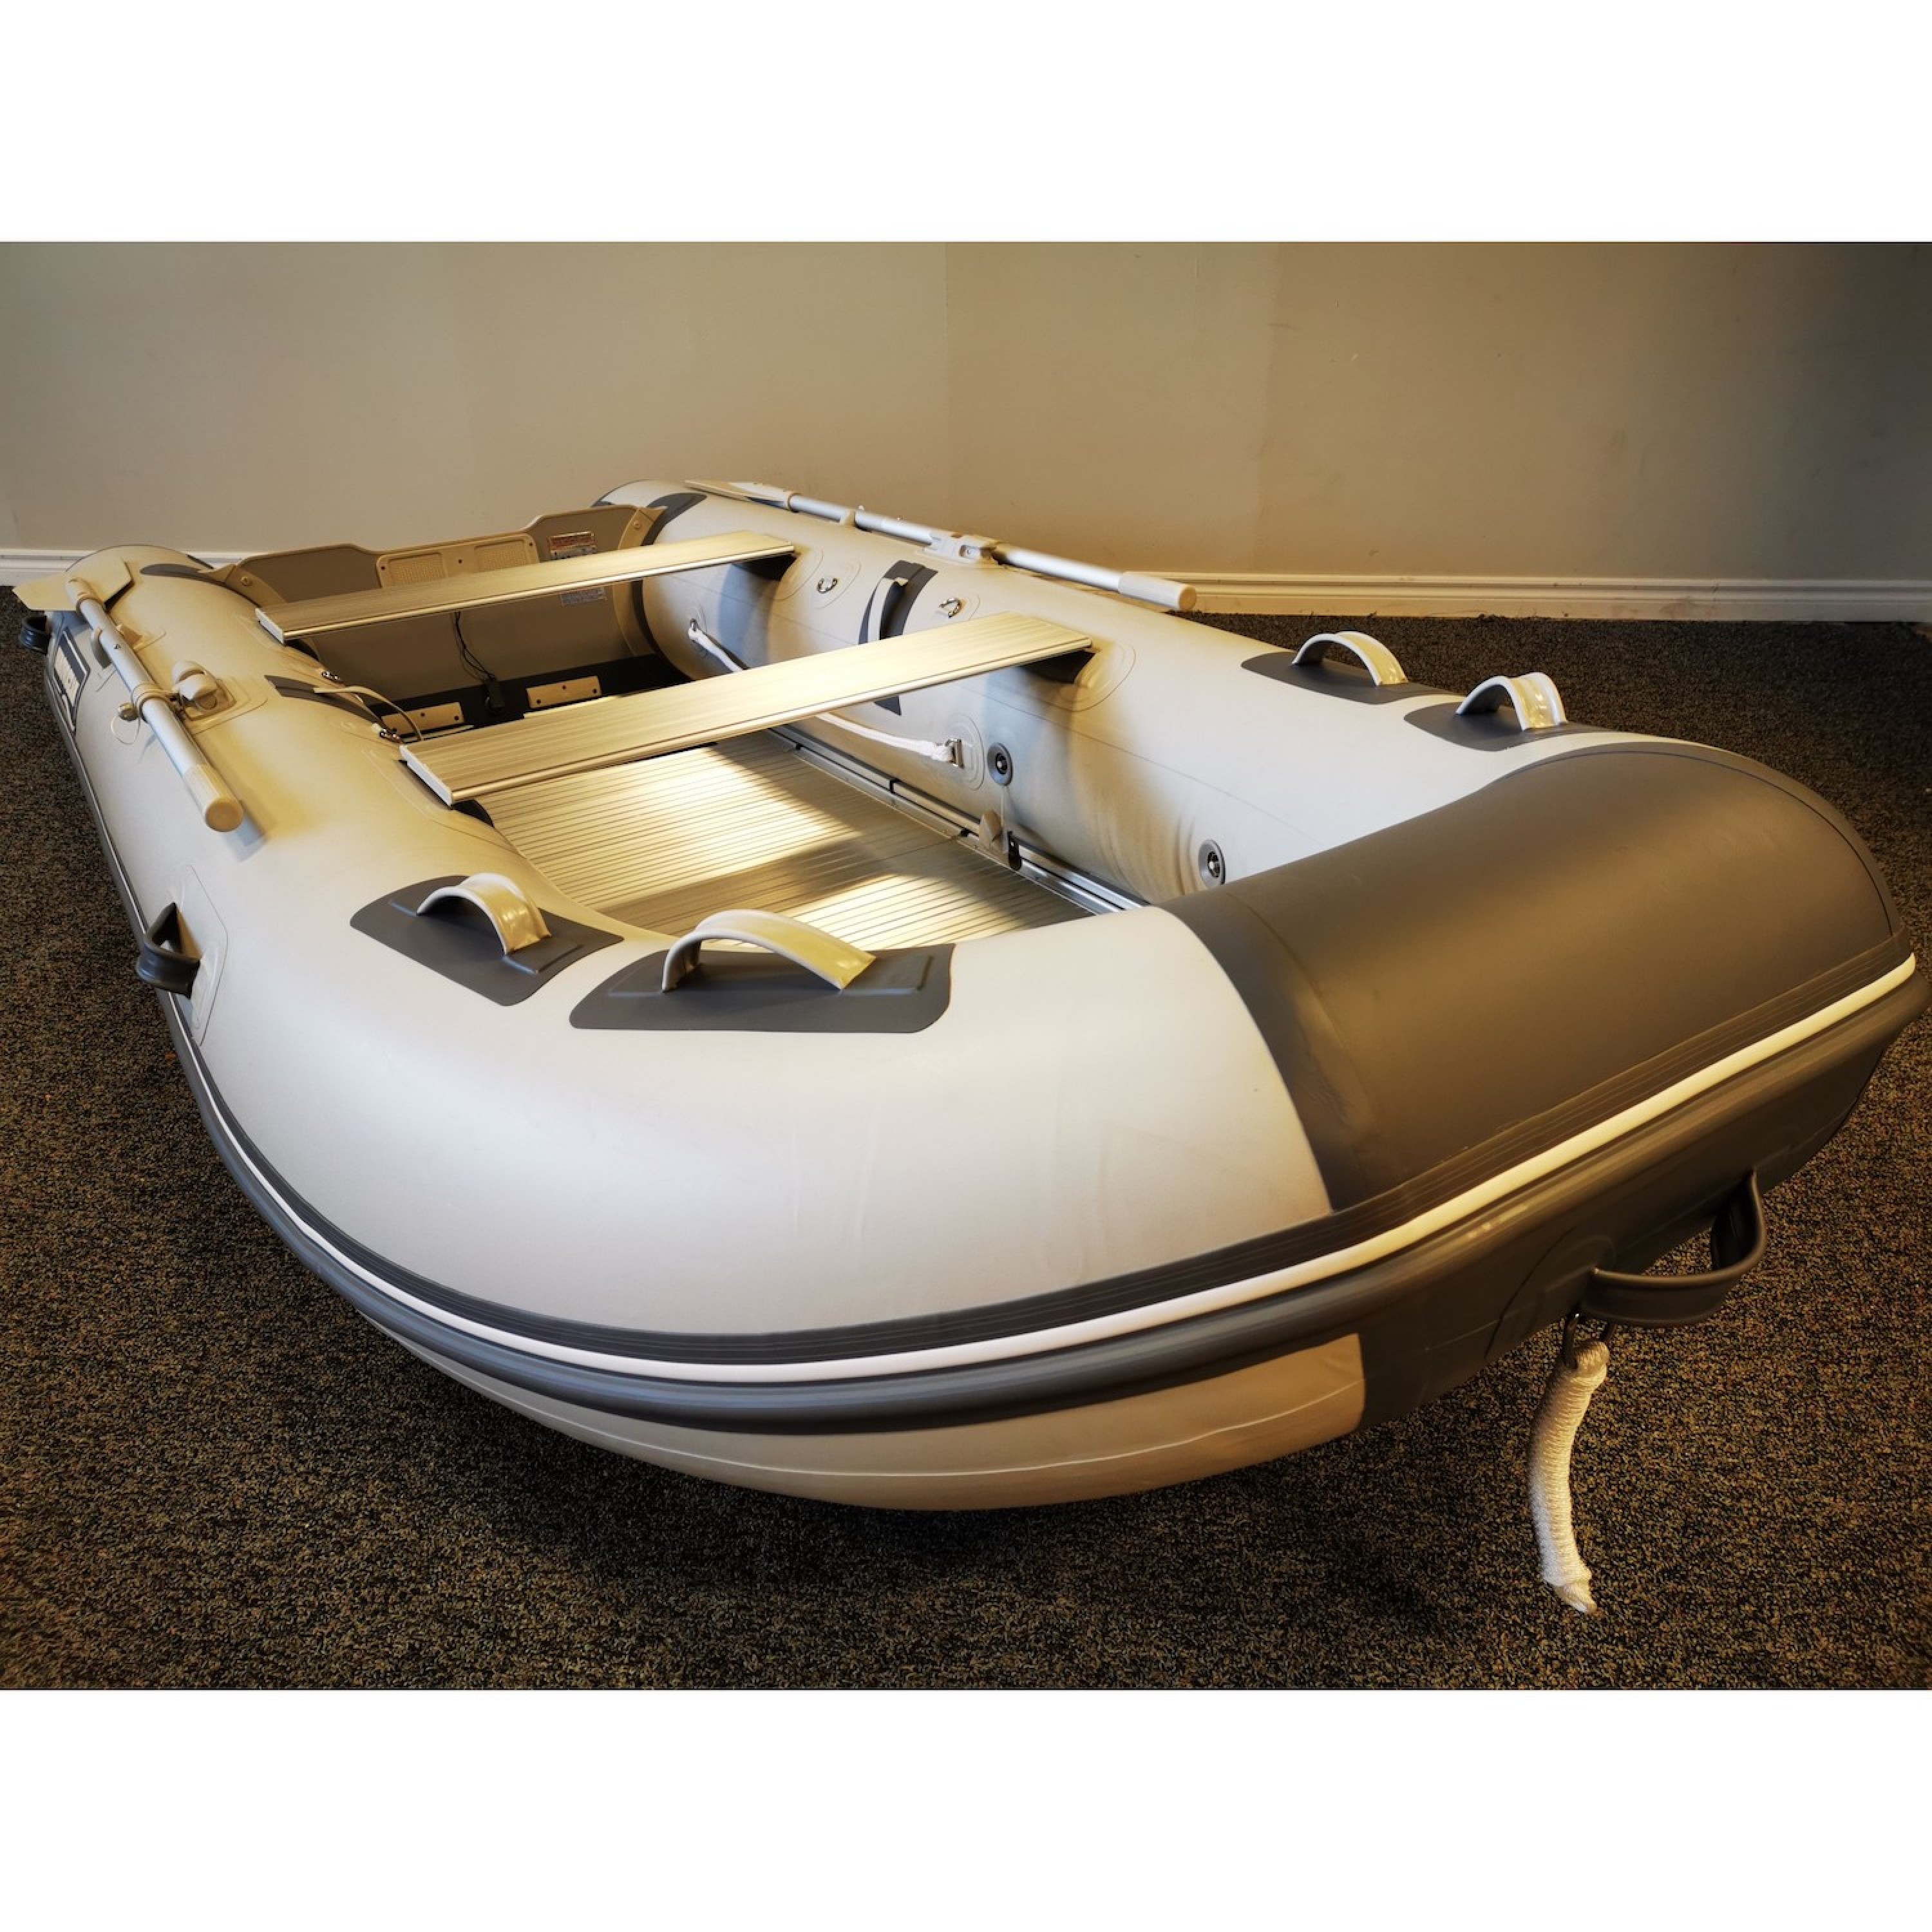 OS330B 11ft Osprey Basic Series Inflatable Boat